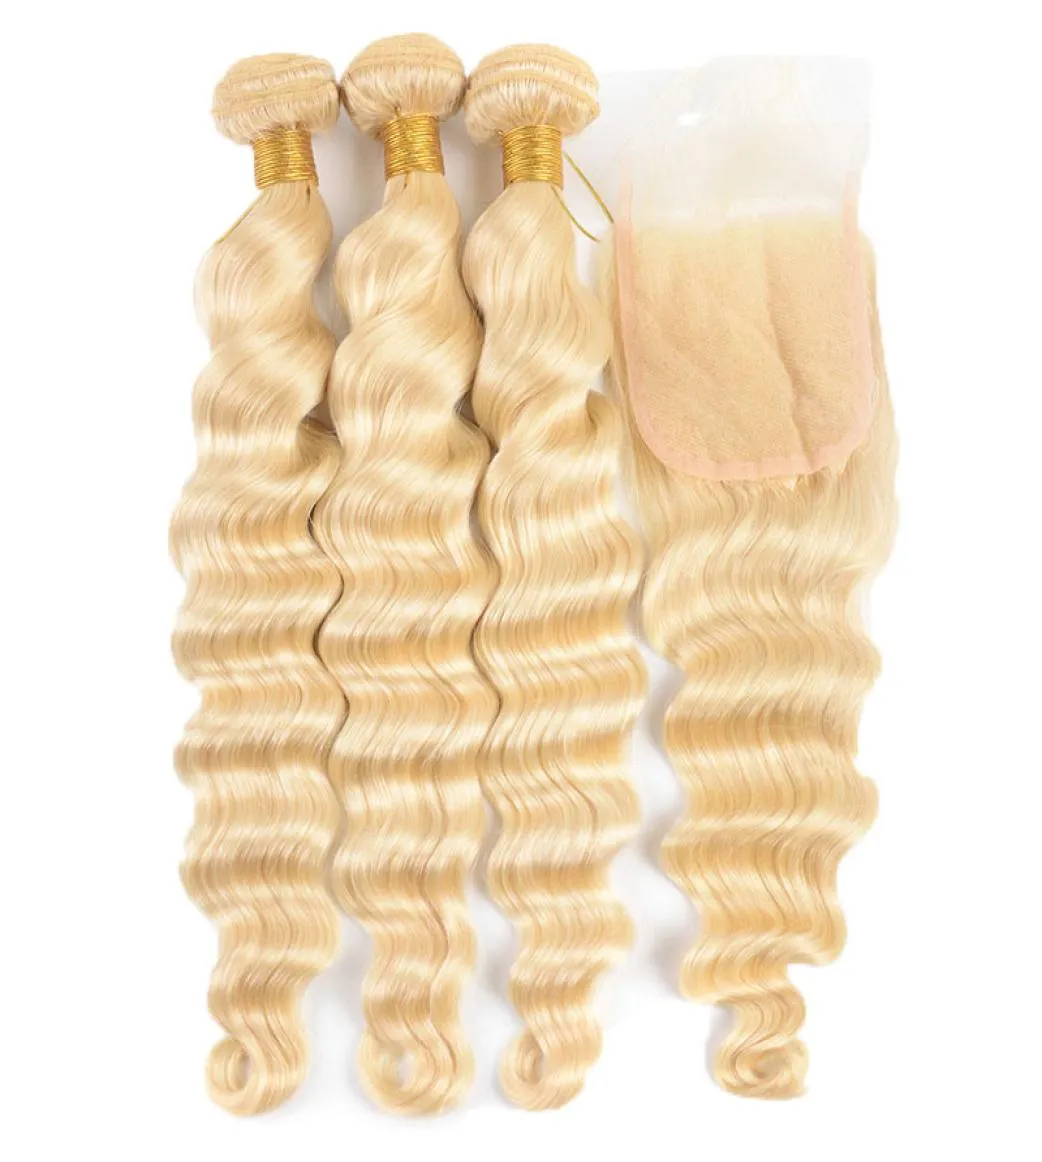 Loose Deep Wave 613 Blonde Remy Human Hair Weave Bundles With 4x4 Lace Closure 2147929